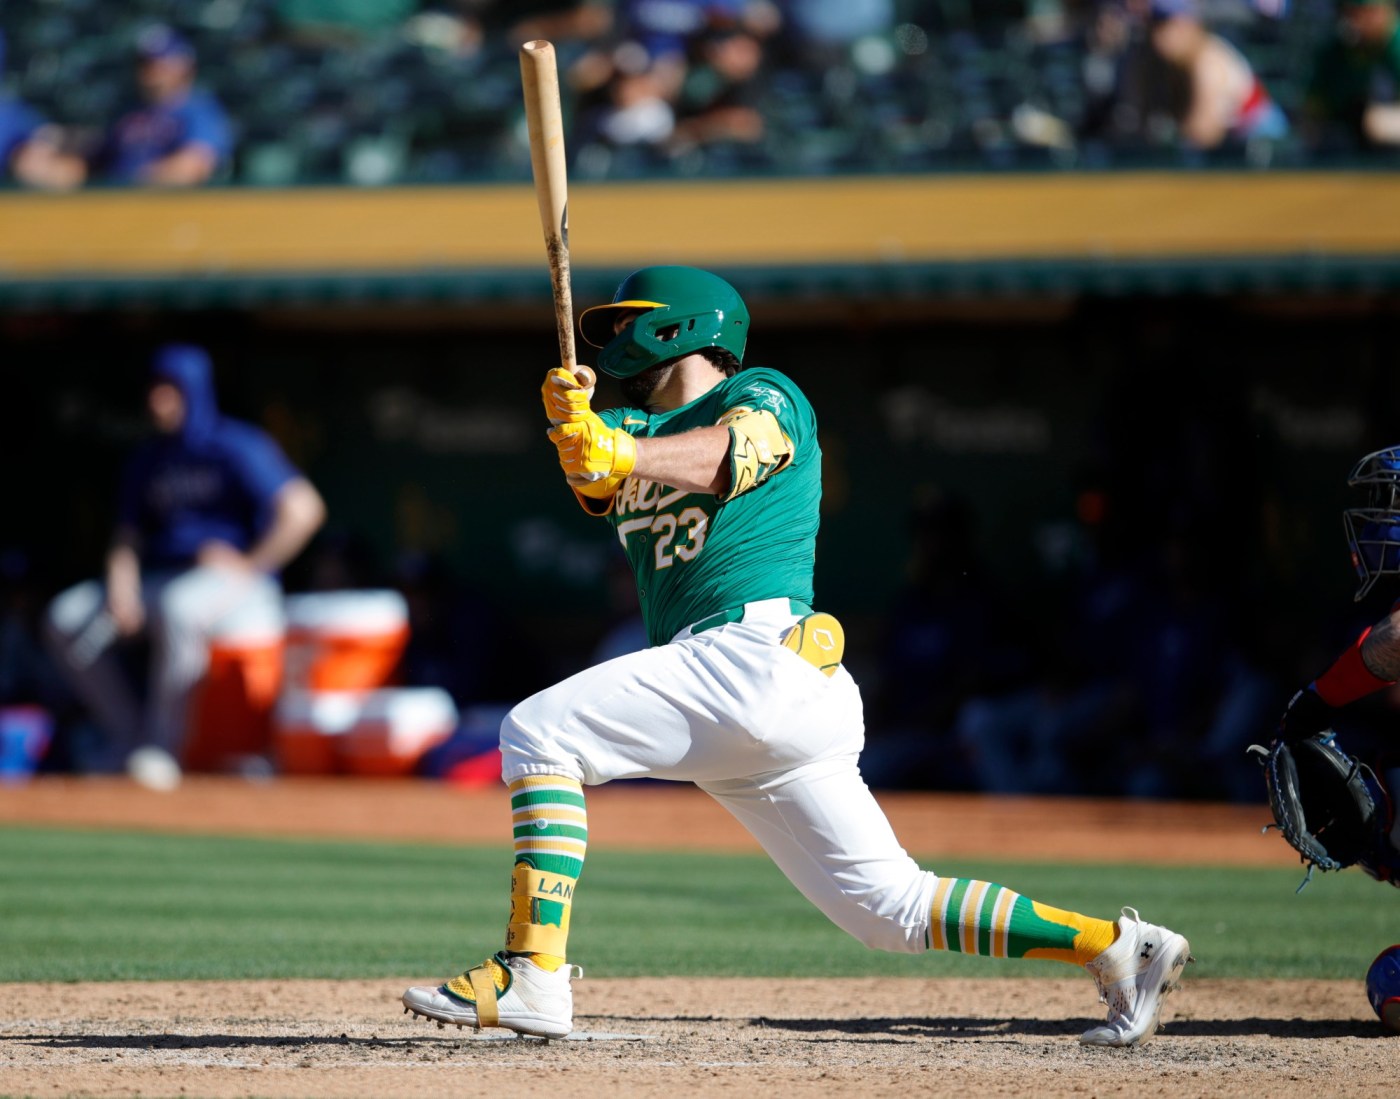 rangers-break-open-game-2-late,-survive-late-a’s-rally-to-get-doubleheader-split